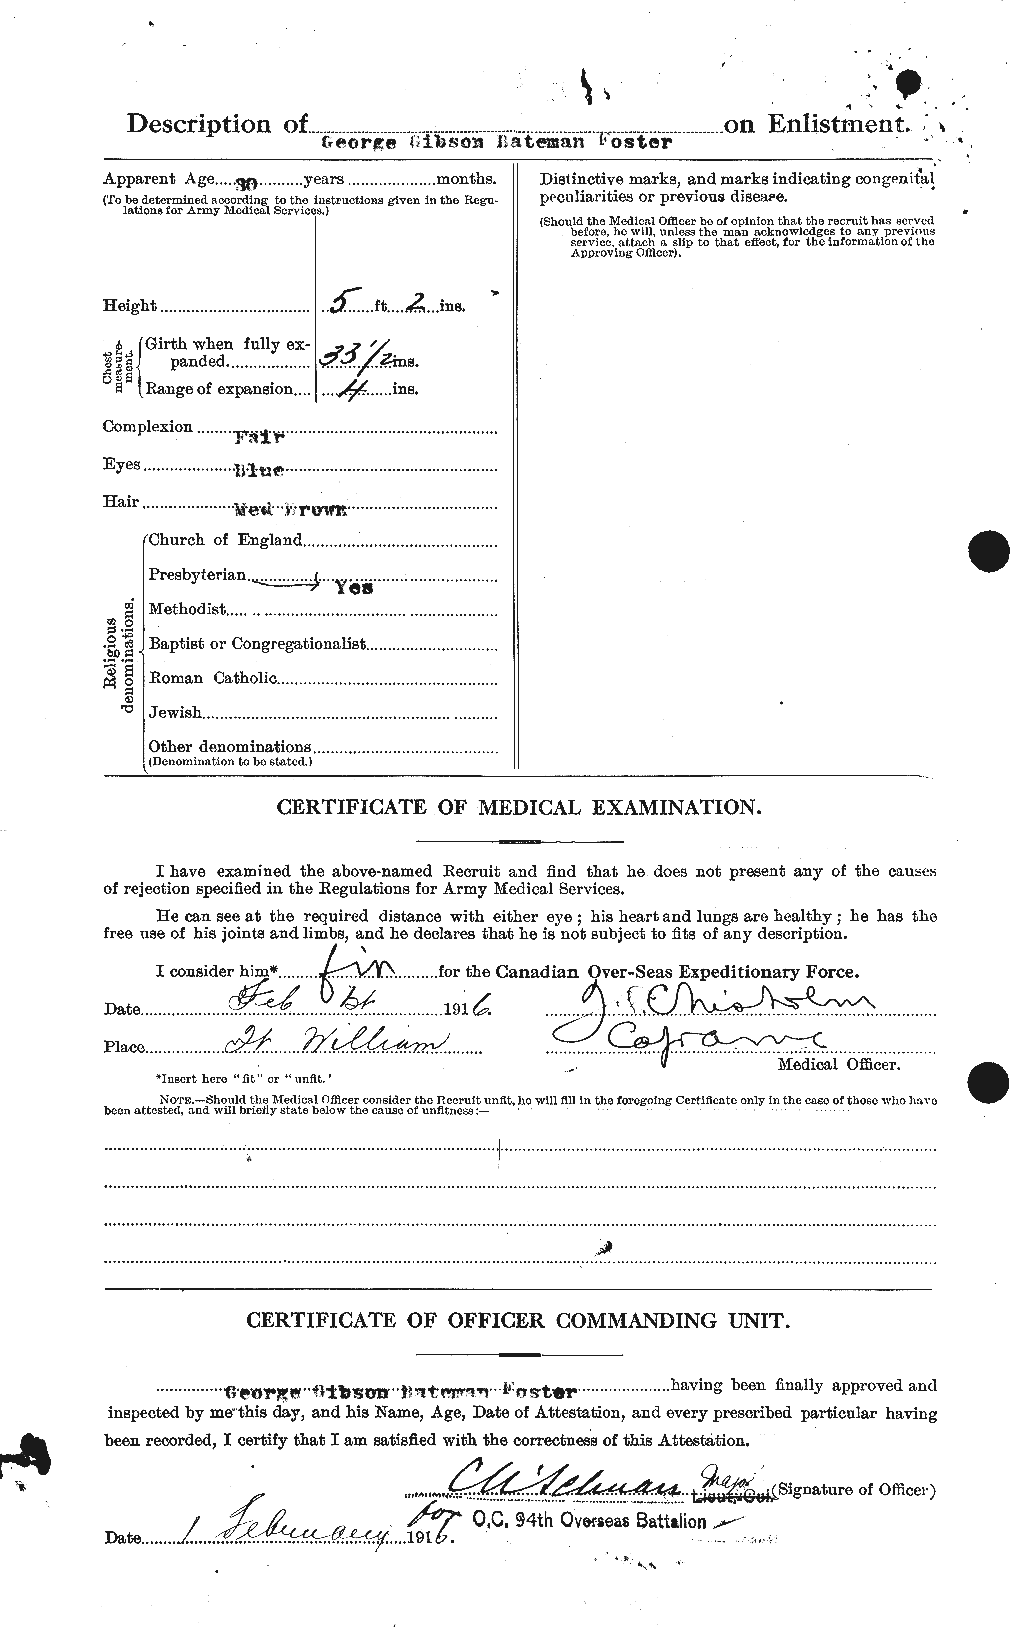 Personnel Records of the First World War - CEF 330690b